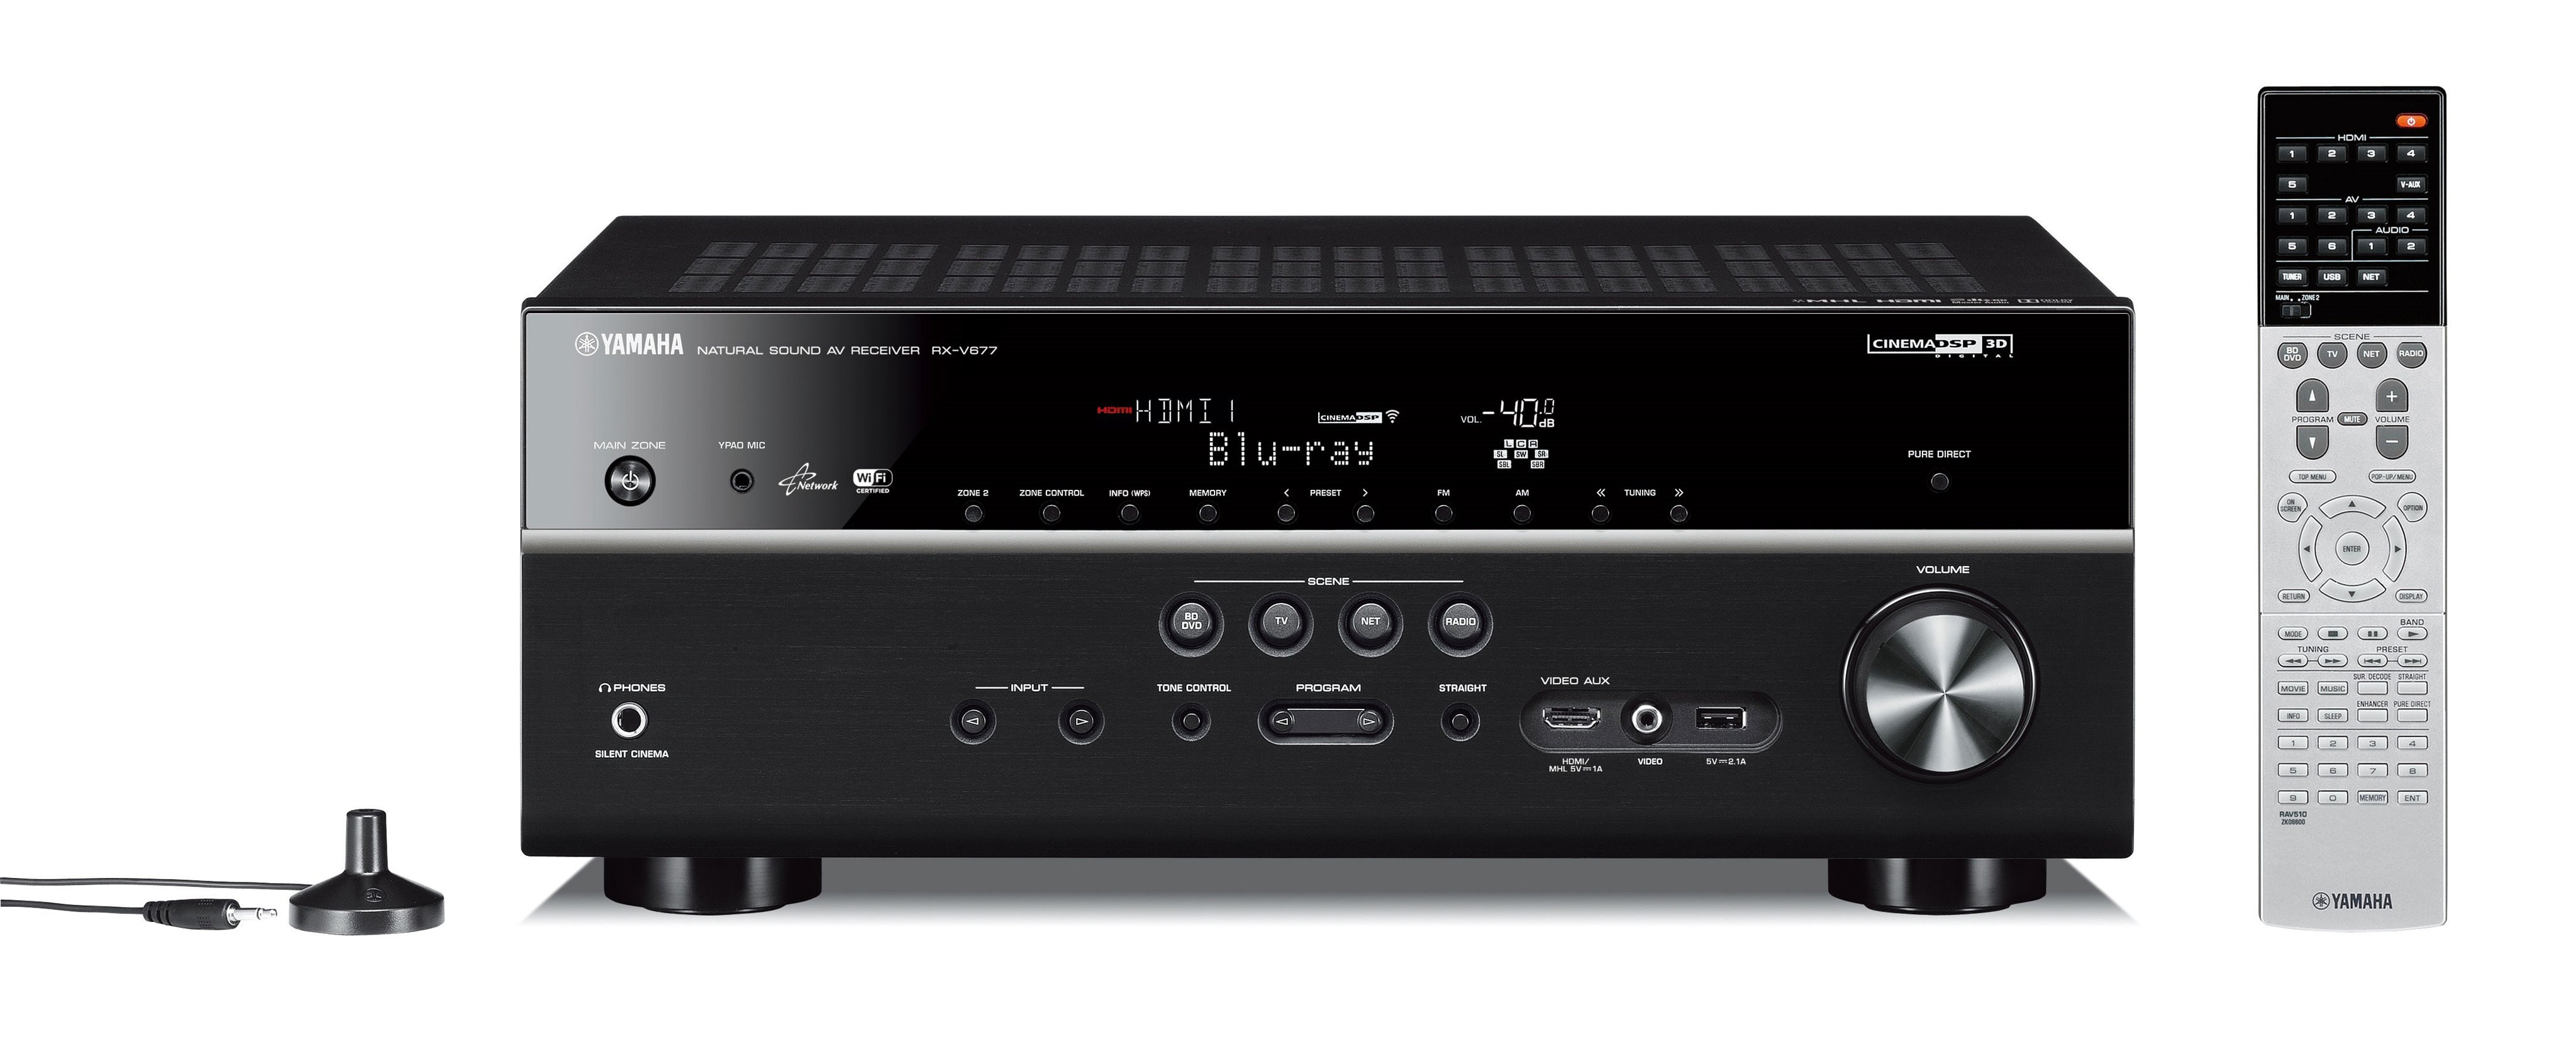 RX-V677 - Overview - AV Receivers - Audio & Visual - Products - Yamaha